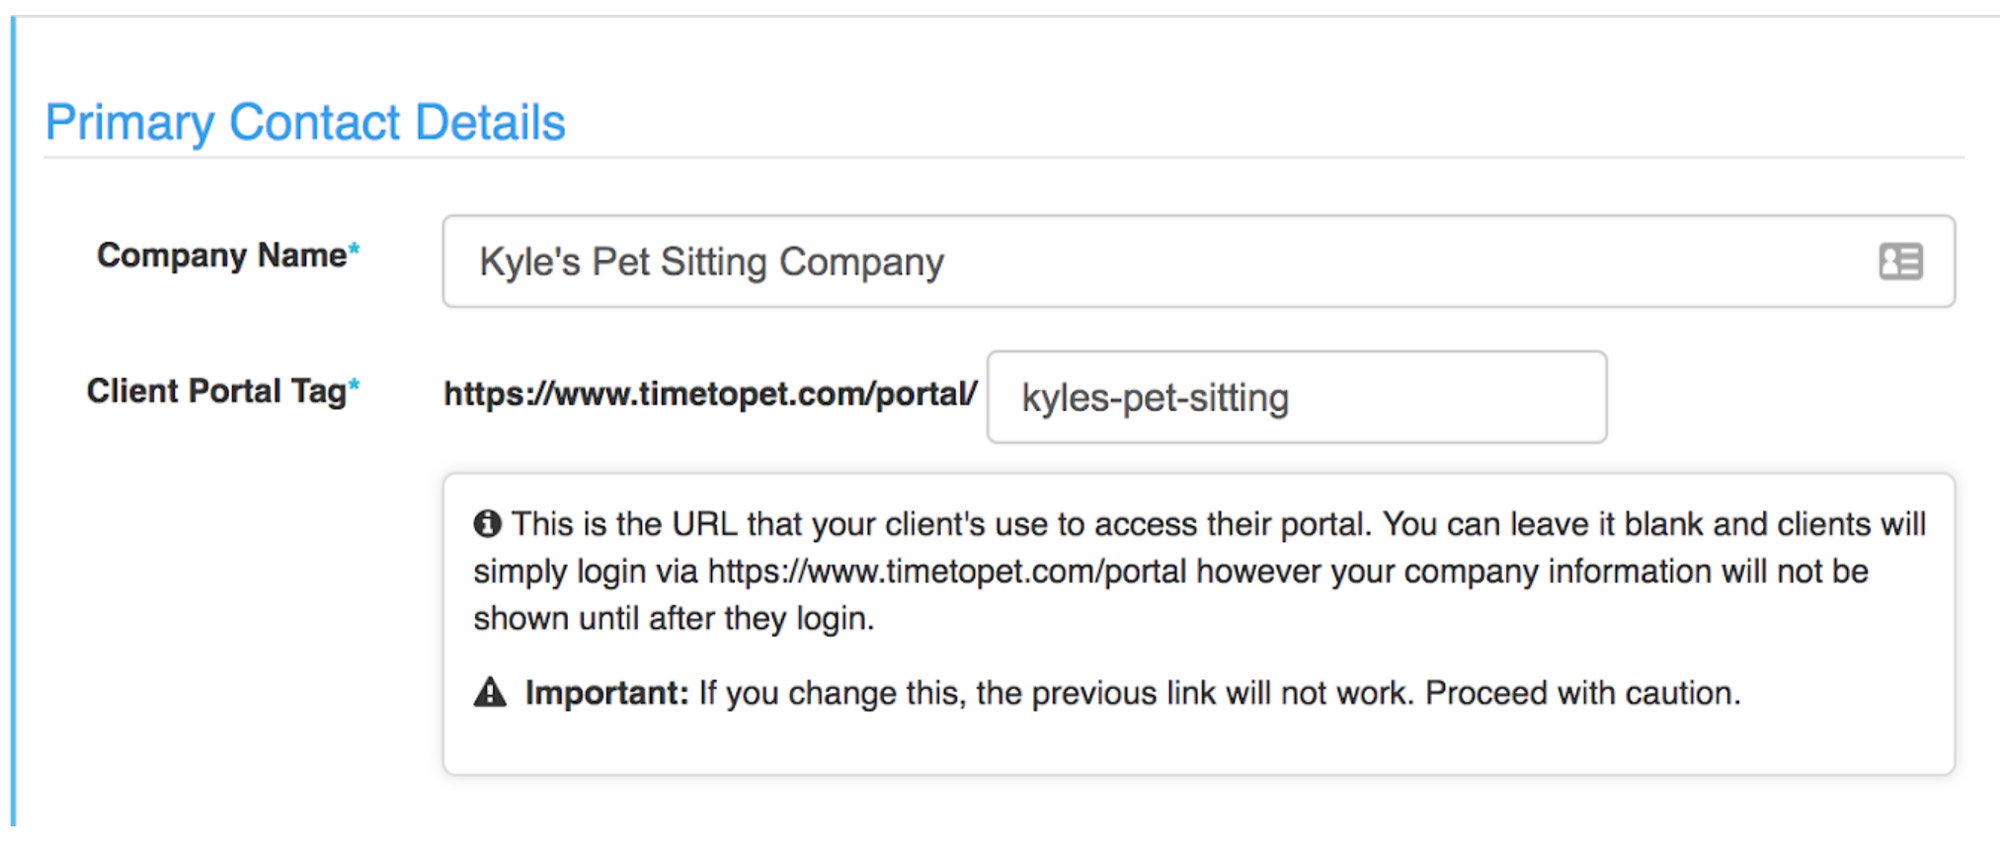 Setting Your Client Portal Tag